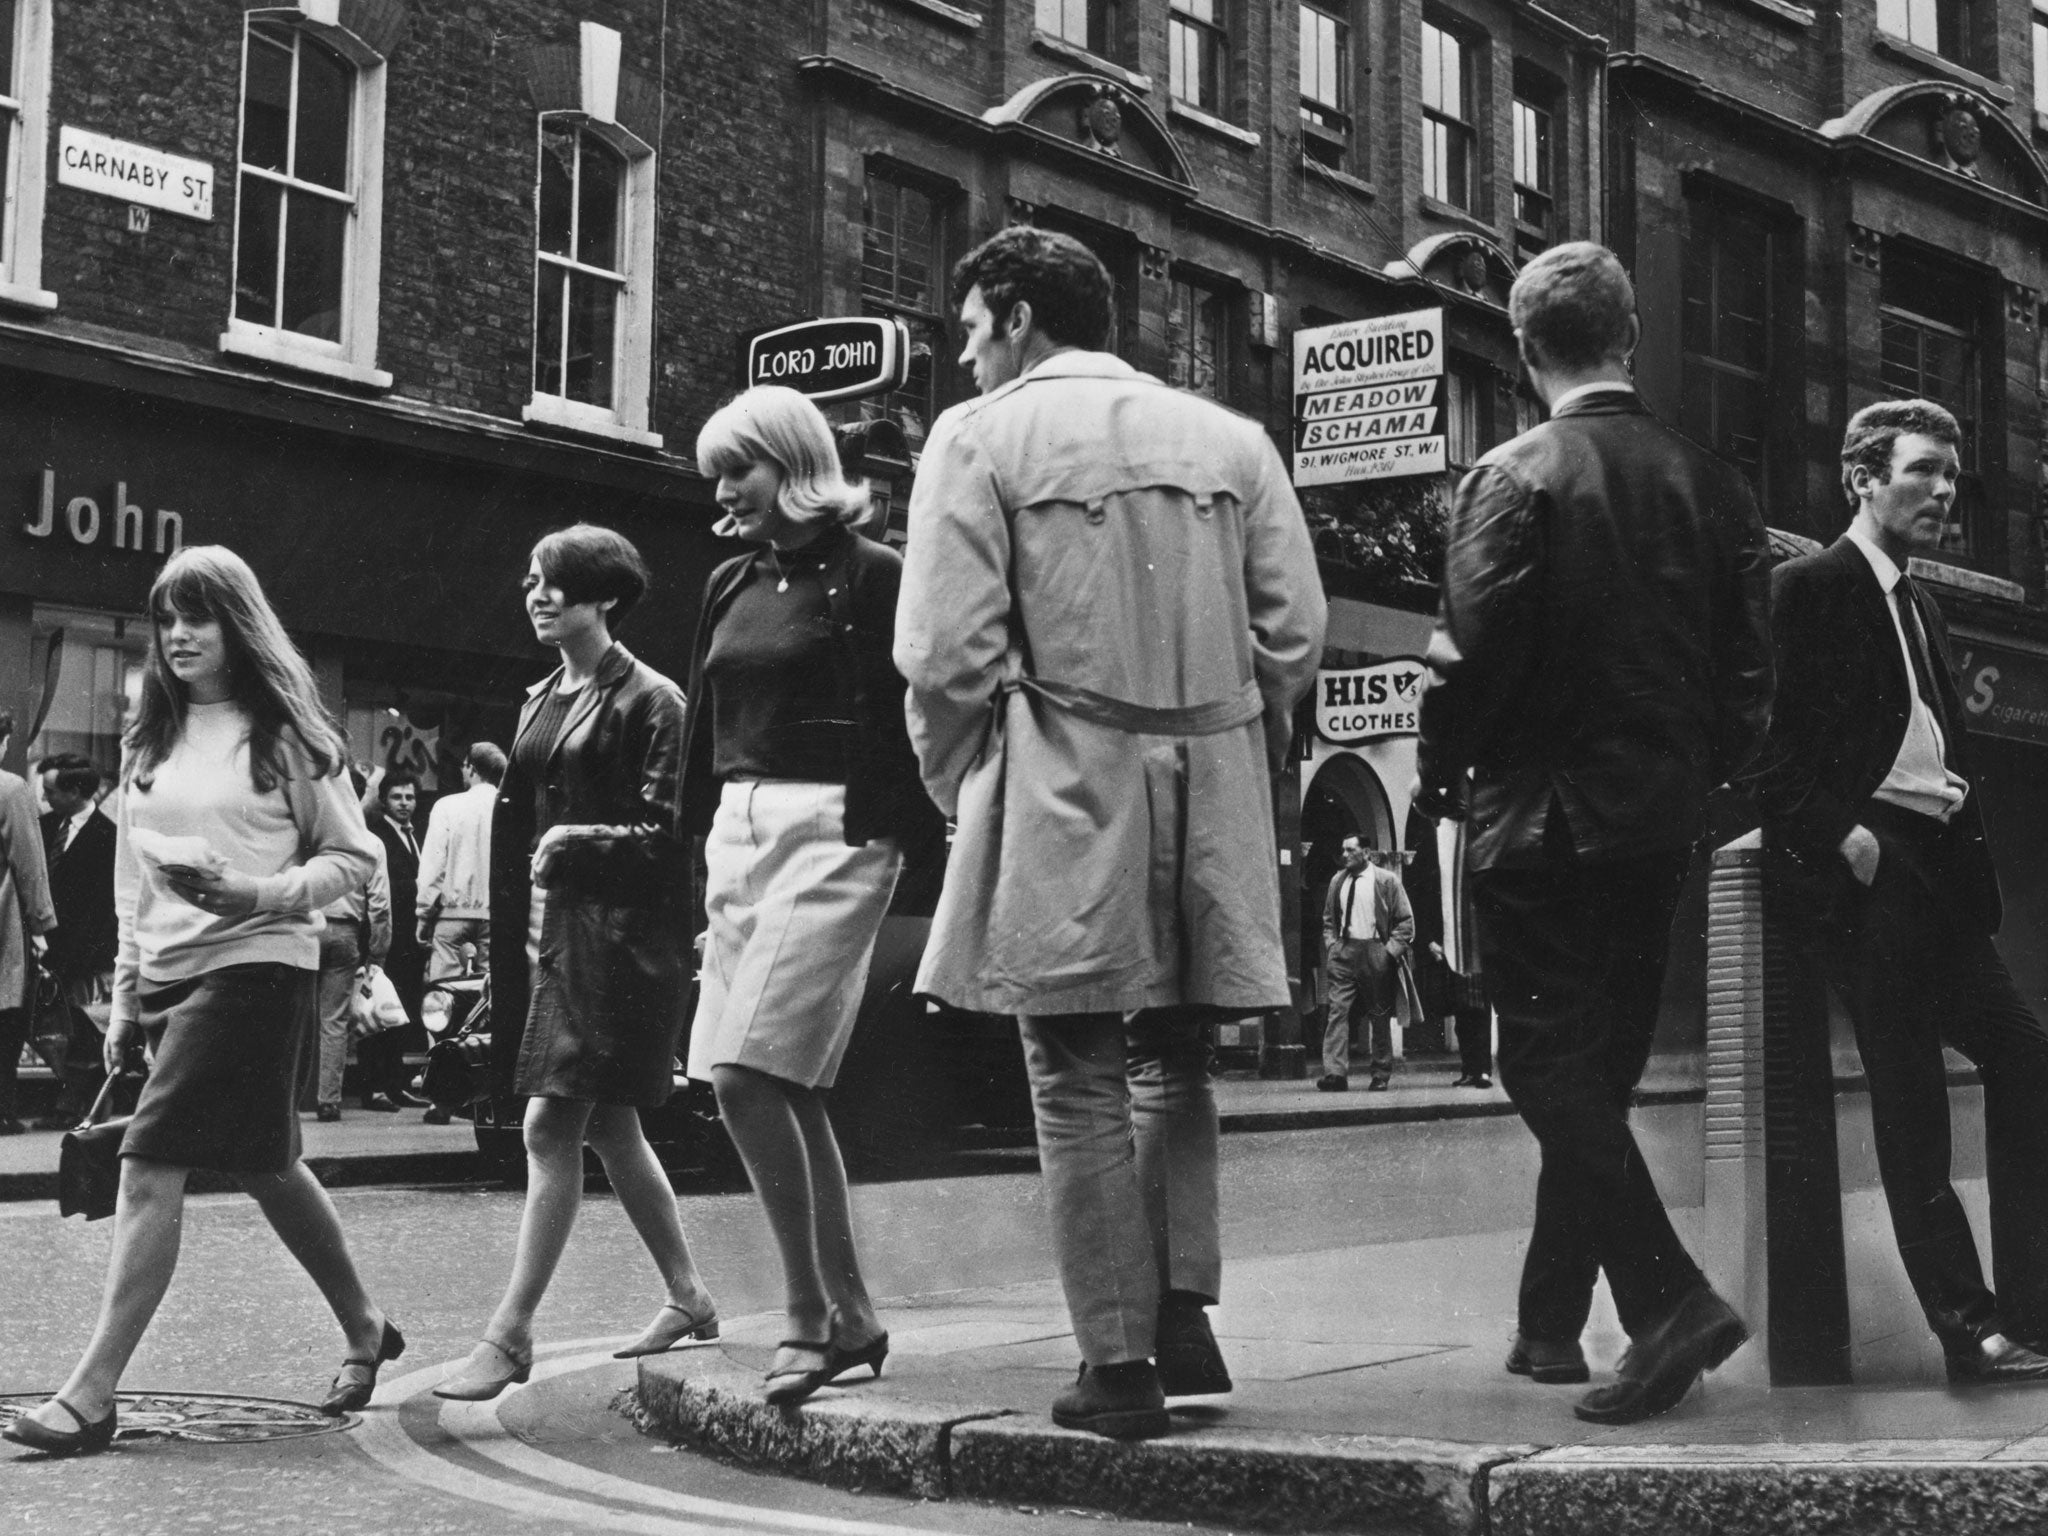 Times past: Carnaby Street in the 1960s